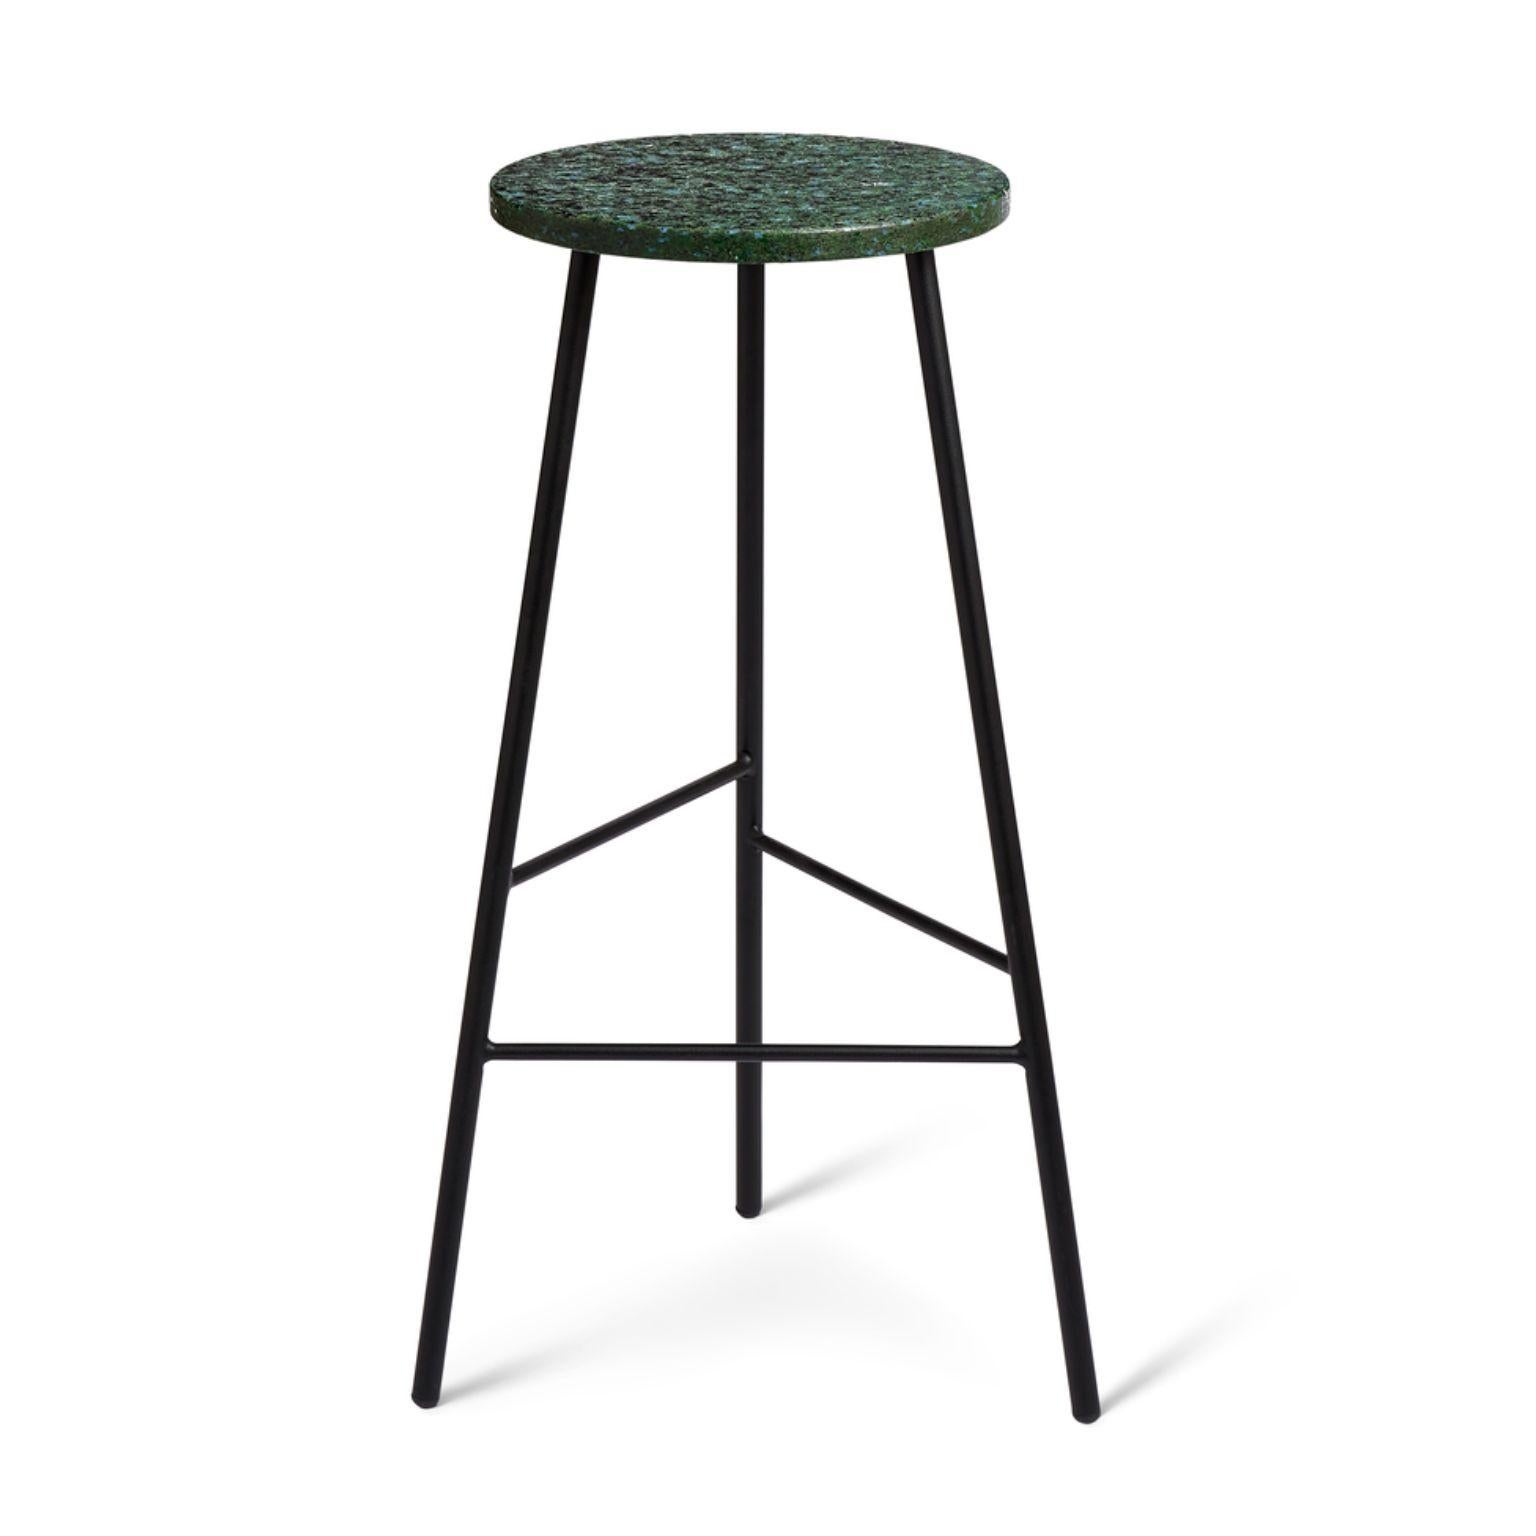 Pebble bar stool large re-plast black noir by Warm Nordic.
Dimensions: D 38 x H 76 cm.
Material: Re-plast, black noir powder coated steel.
Weight: 8 kg
Also available in different colours and finishes. 

Light stools and bar stools with